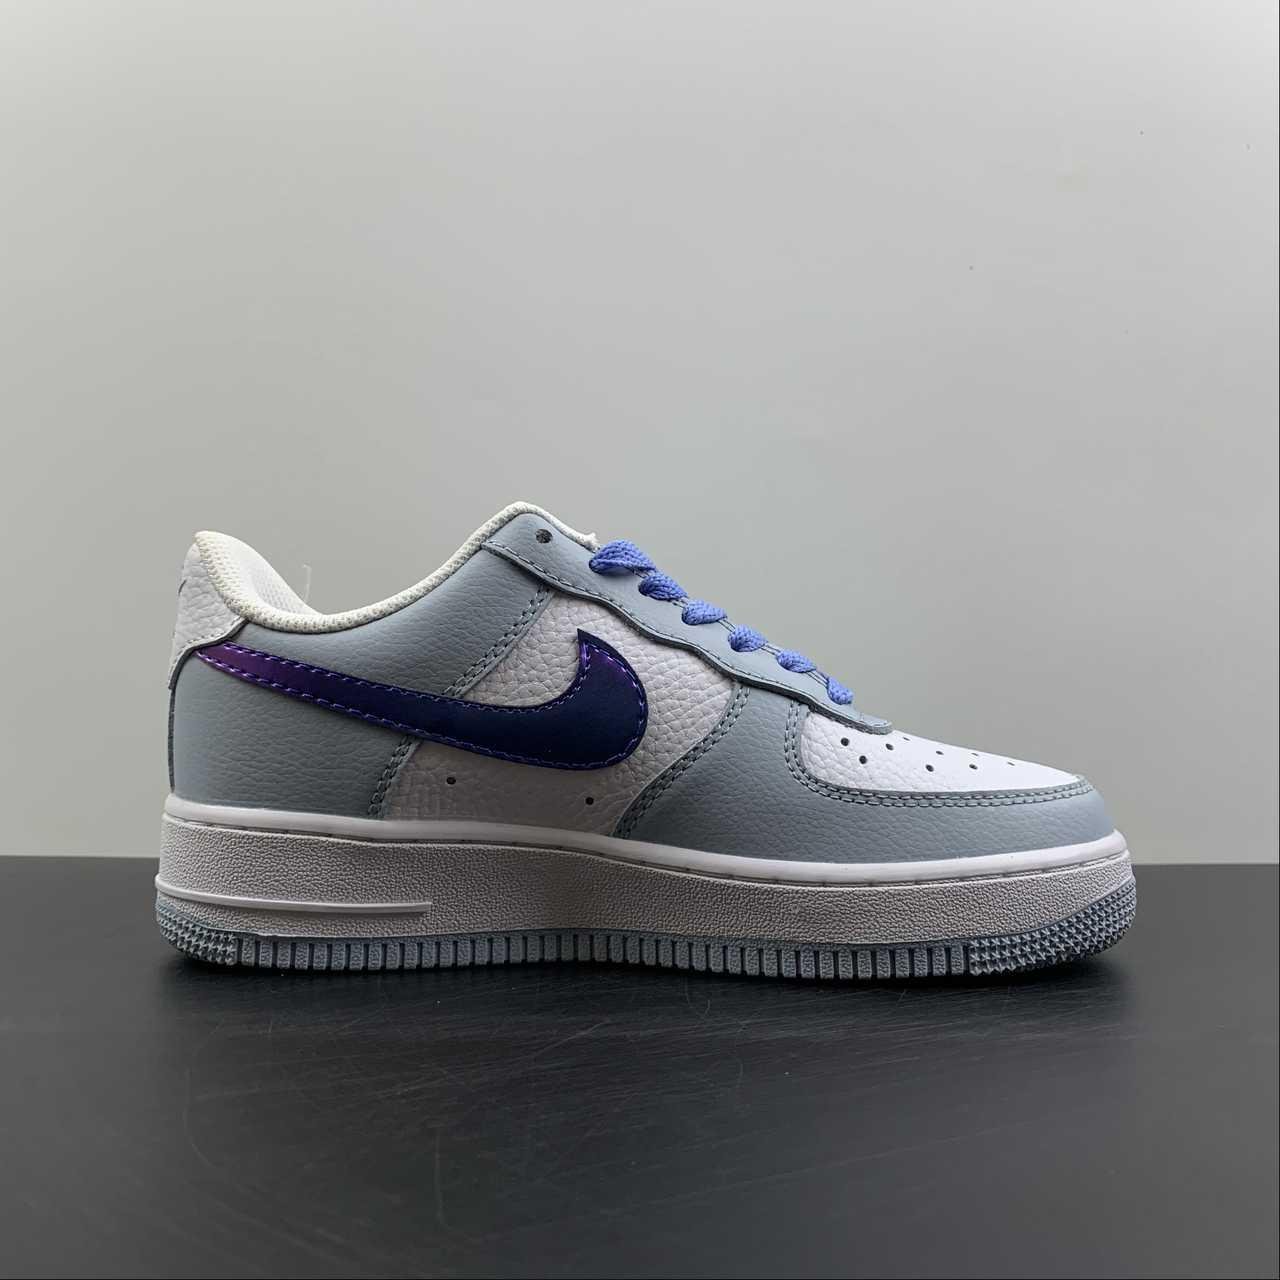 2022      Company grade AIR FORCE 1 AIR FORCE low top casual shoes 3